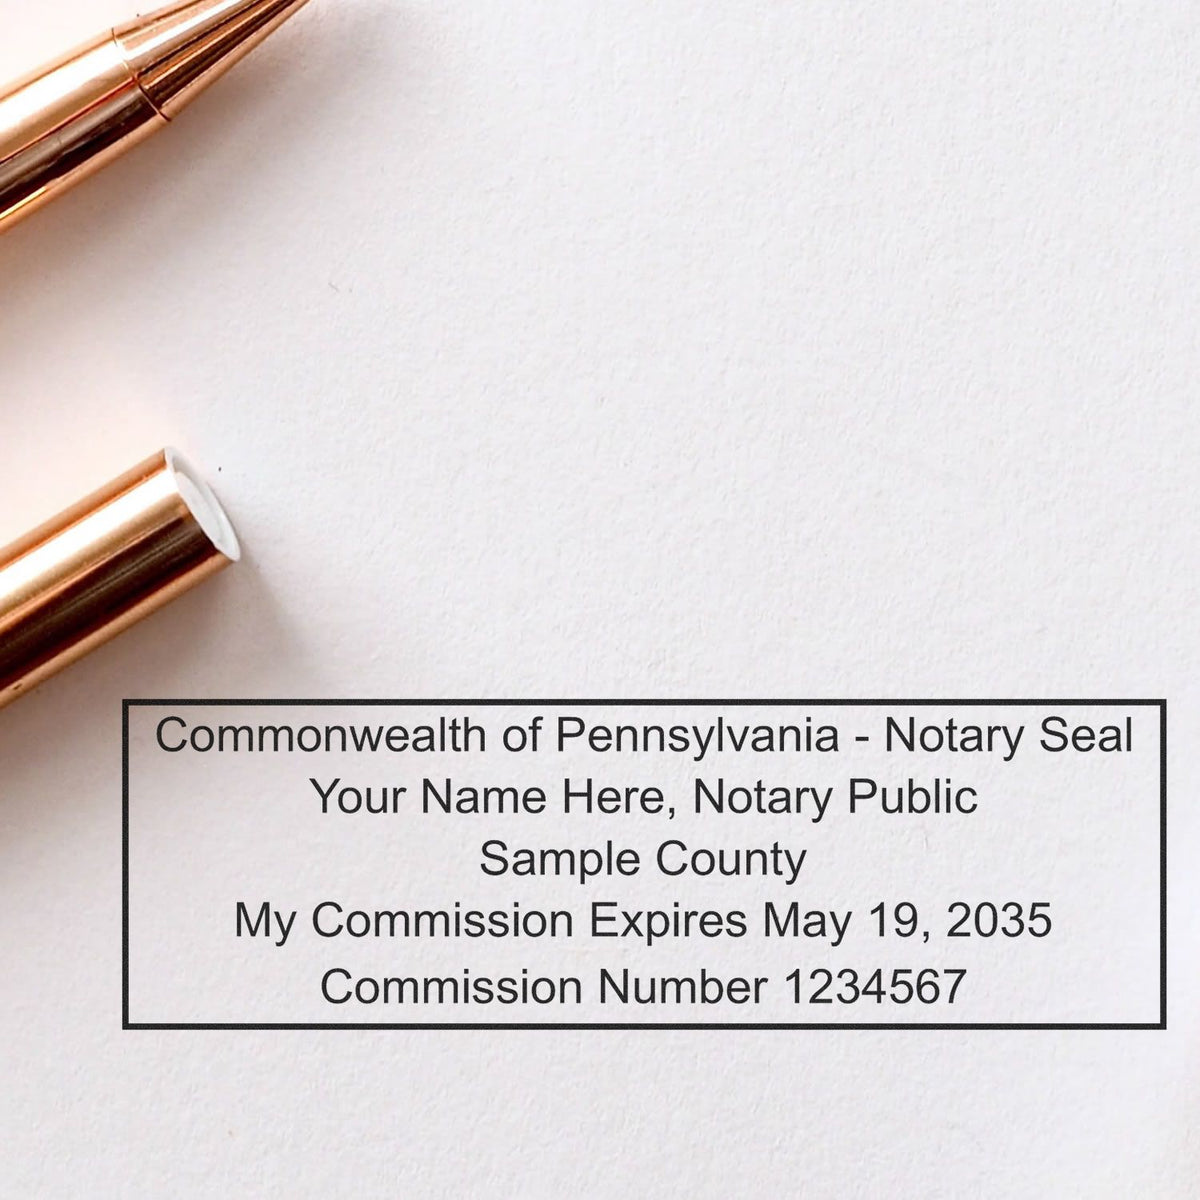 A lifestyle photo showing a stamped image of the Heavy-Duty Pennsylvania Rectangular Notary Stamp on a piece of paper